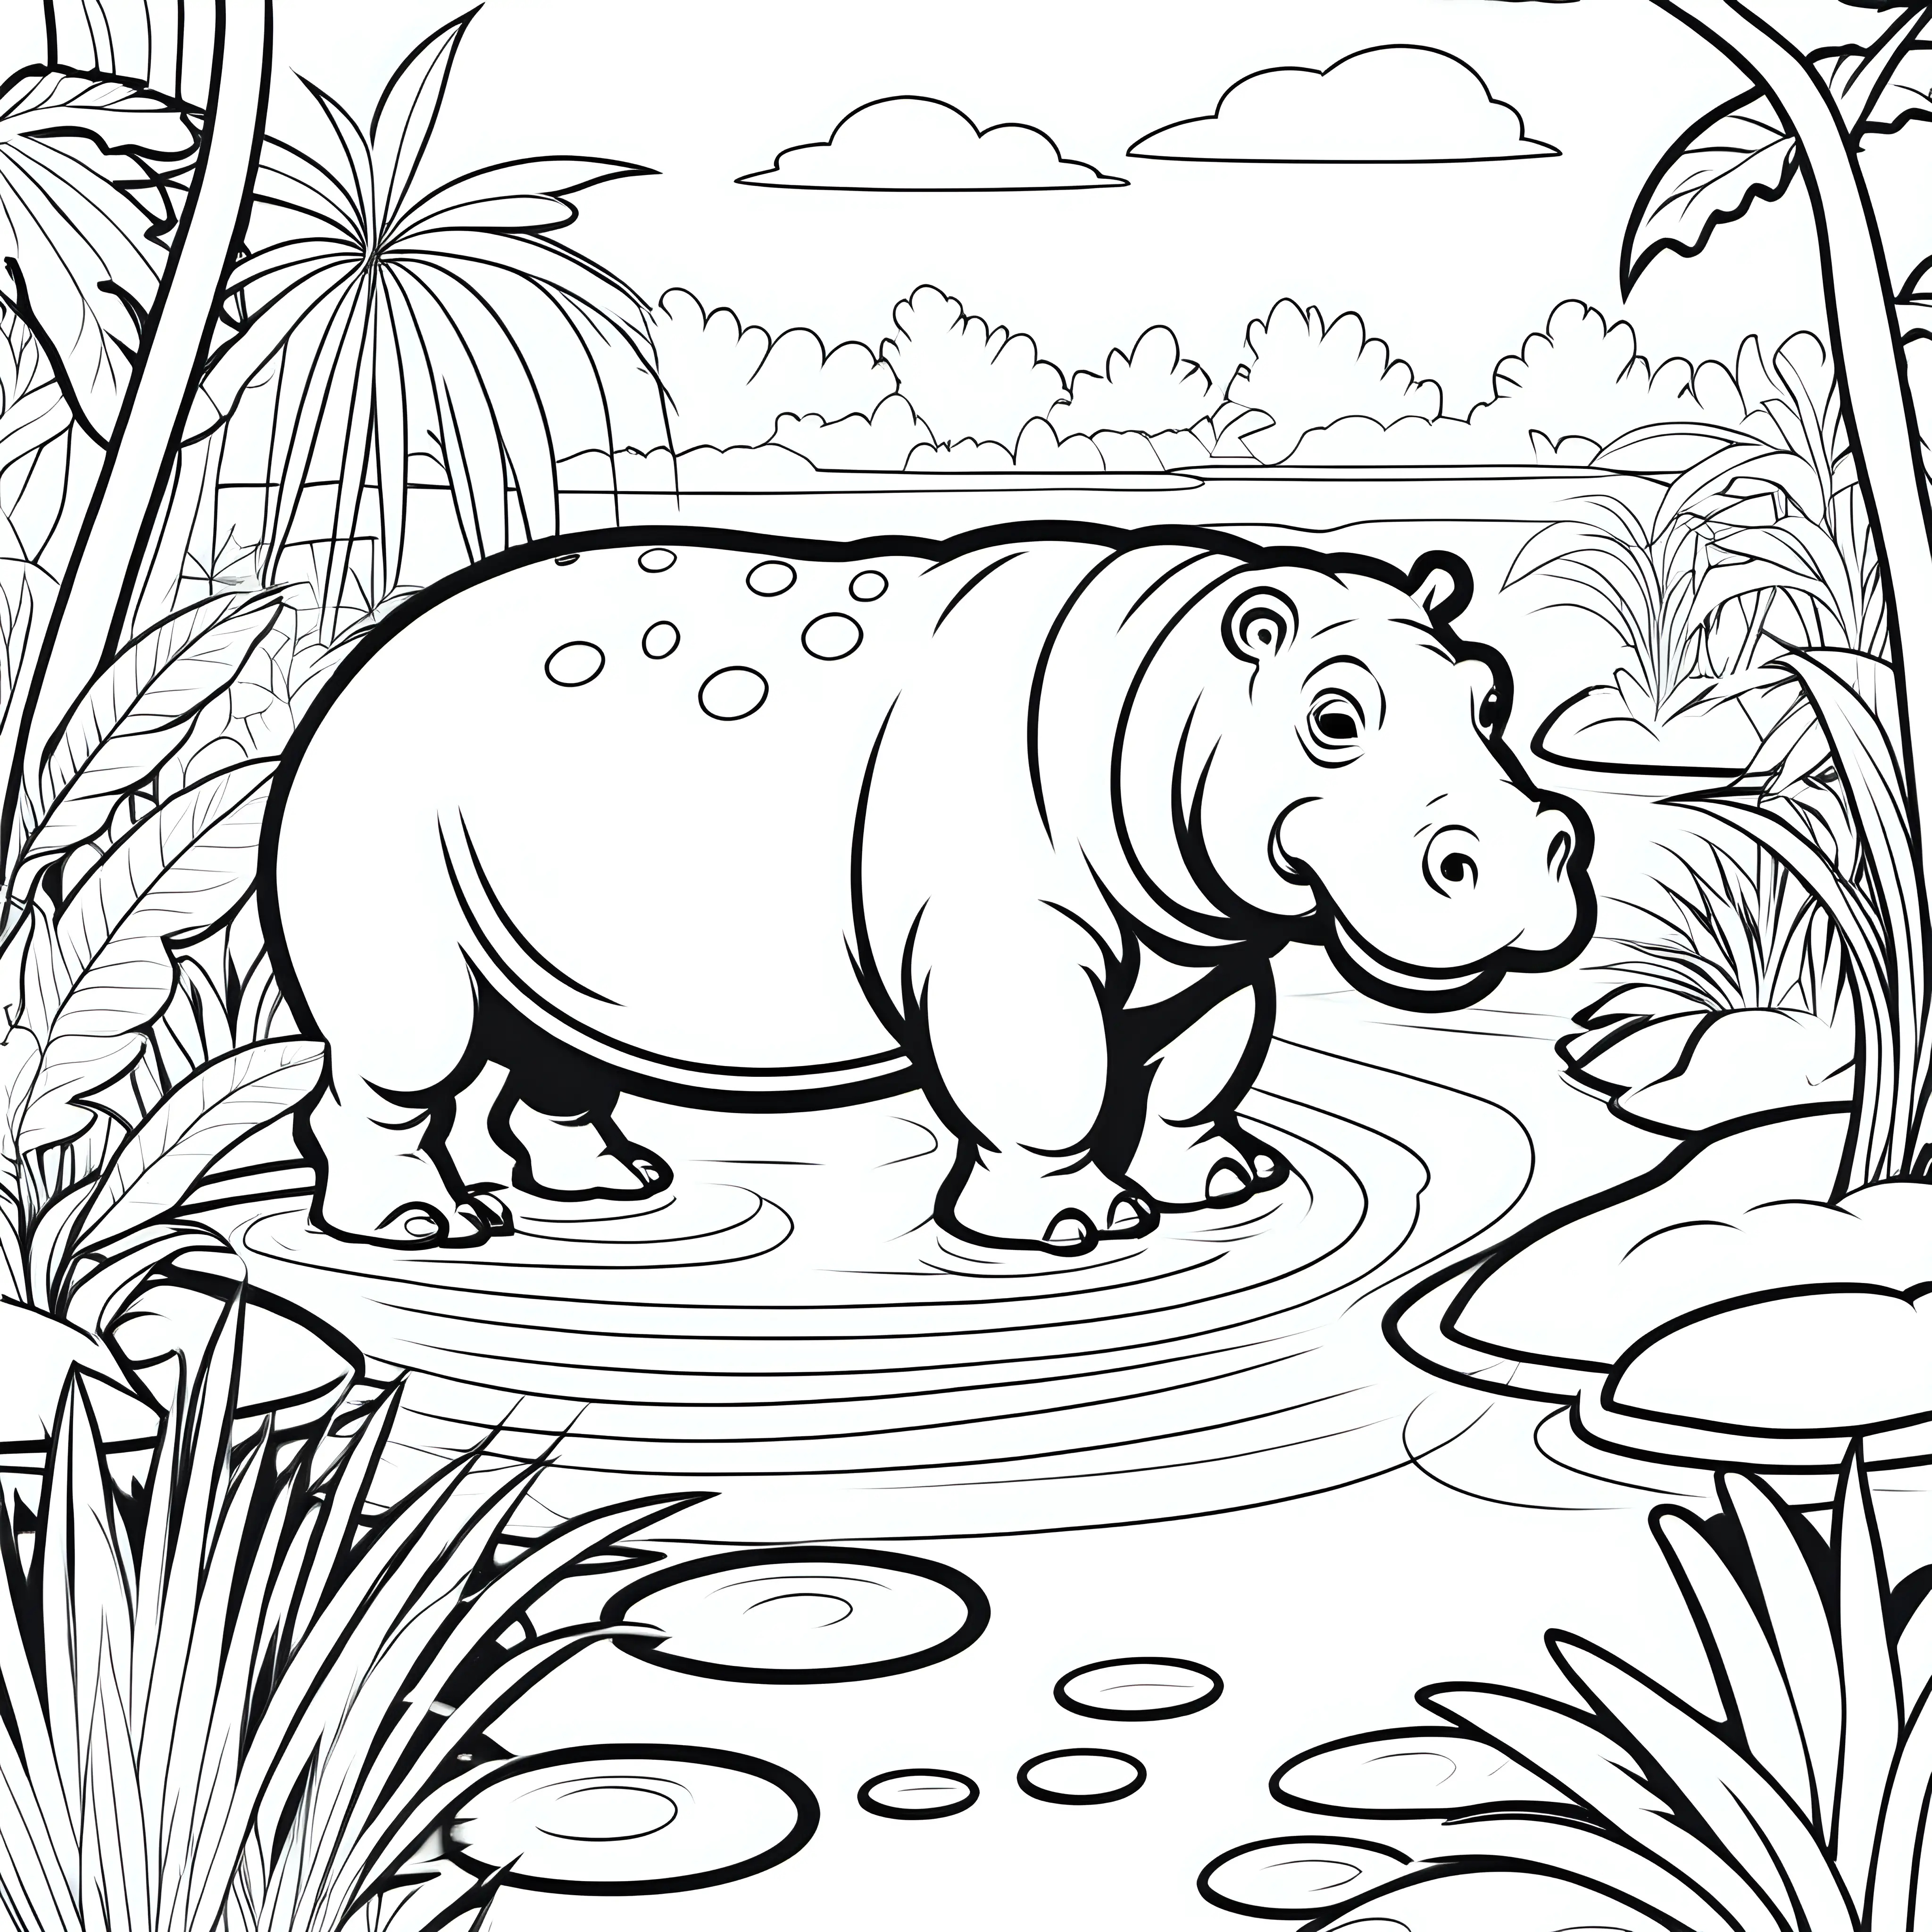 Hippopotamus Coloring Page Peaceful Scene in Garden of Eden by the Water